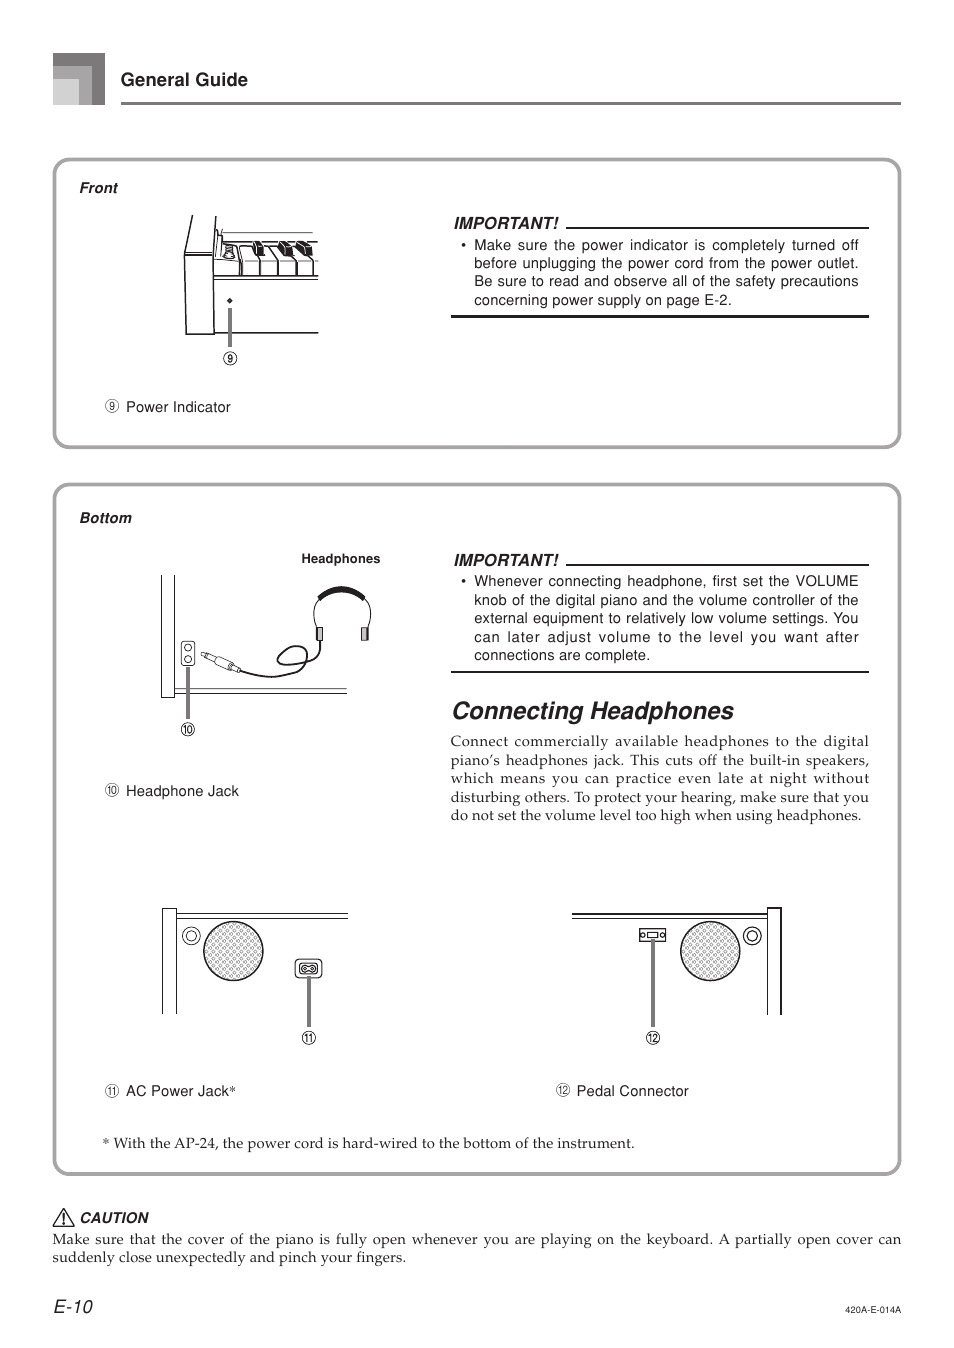 Connecting headphones | Casio AP-24 User Manual | Page 14 / 36